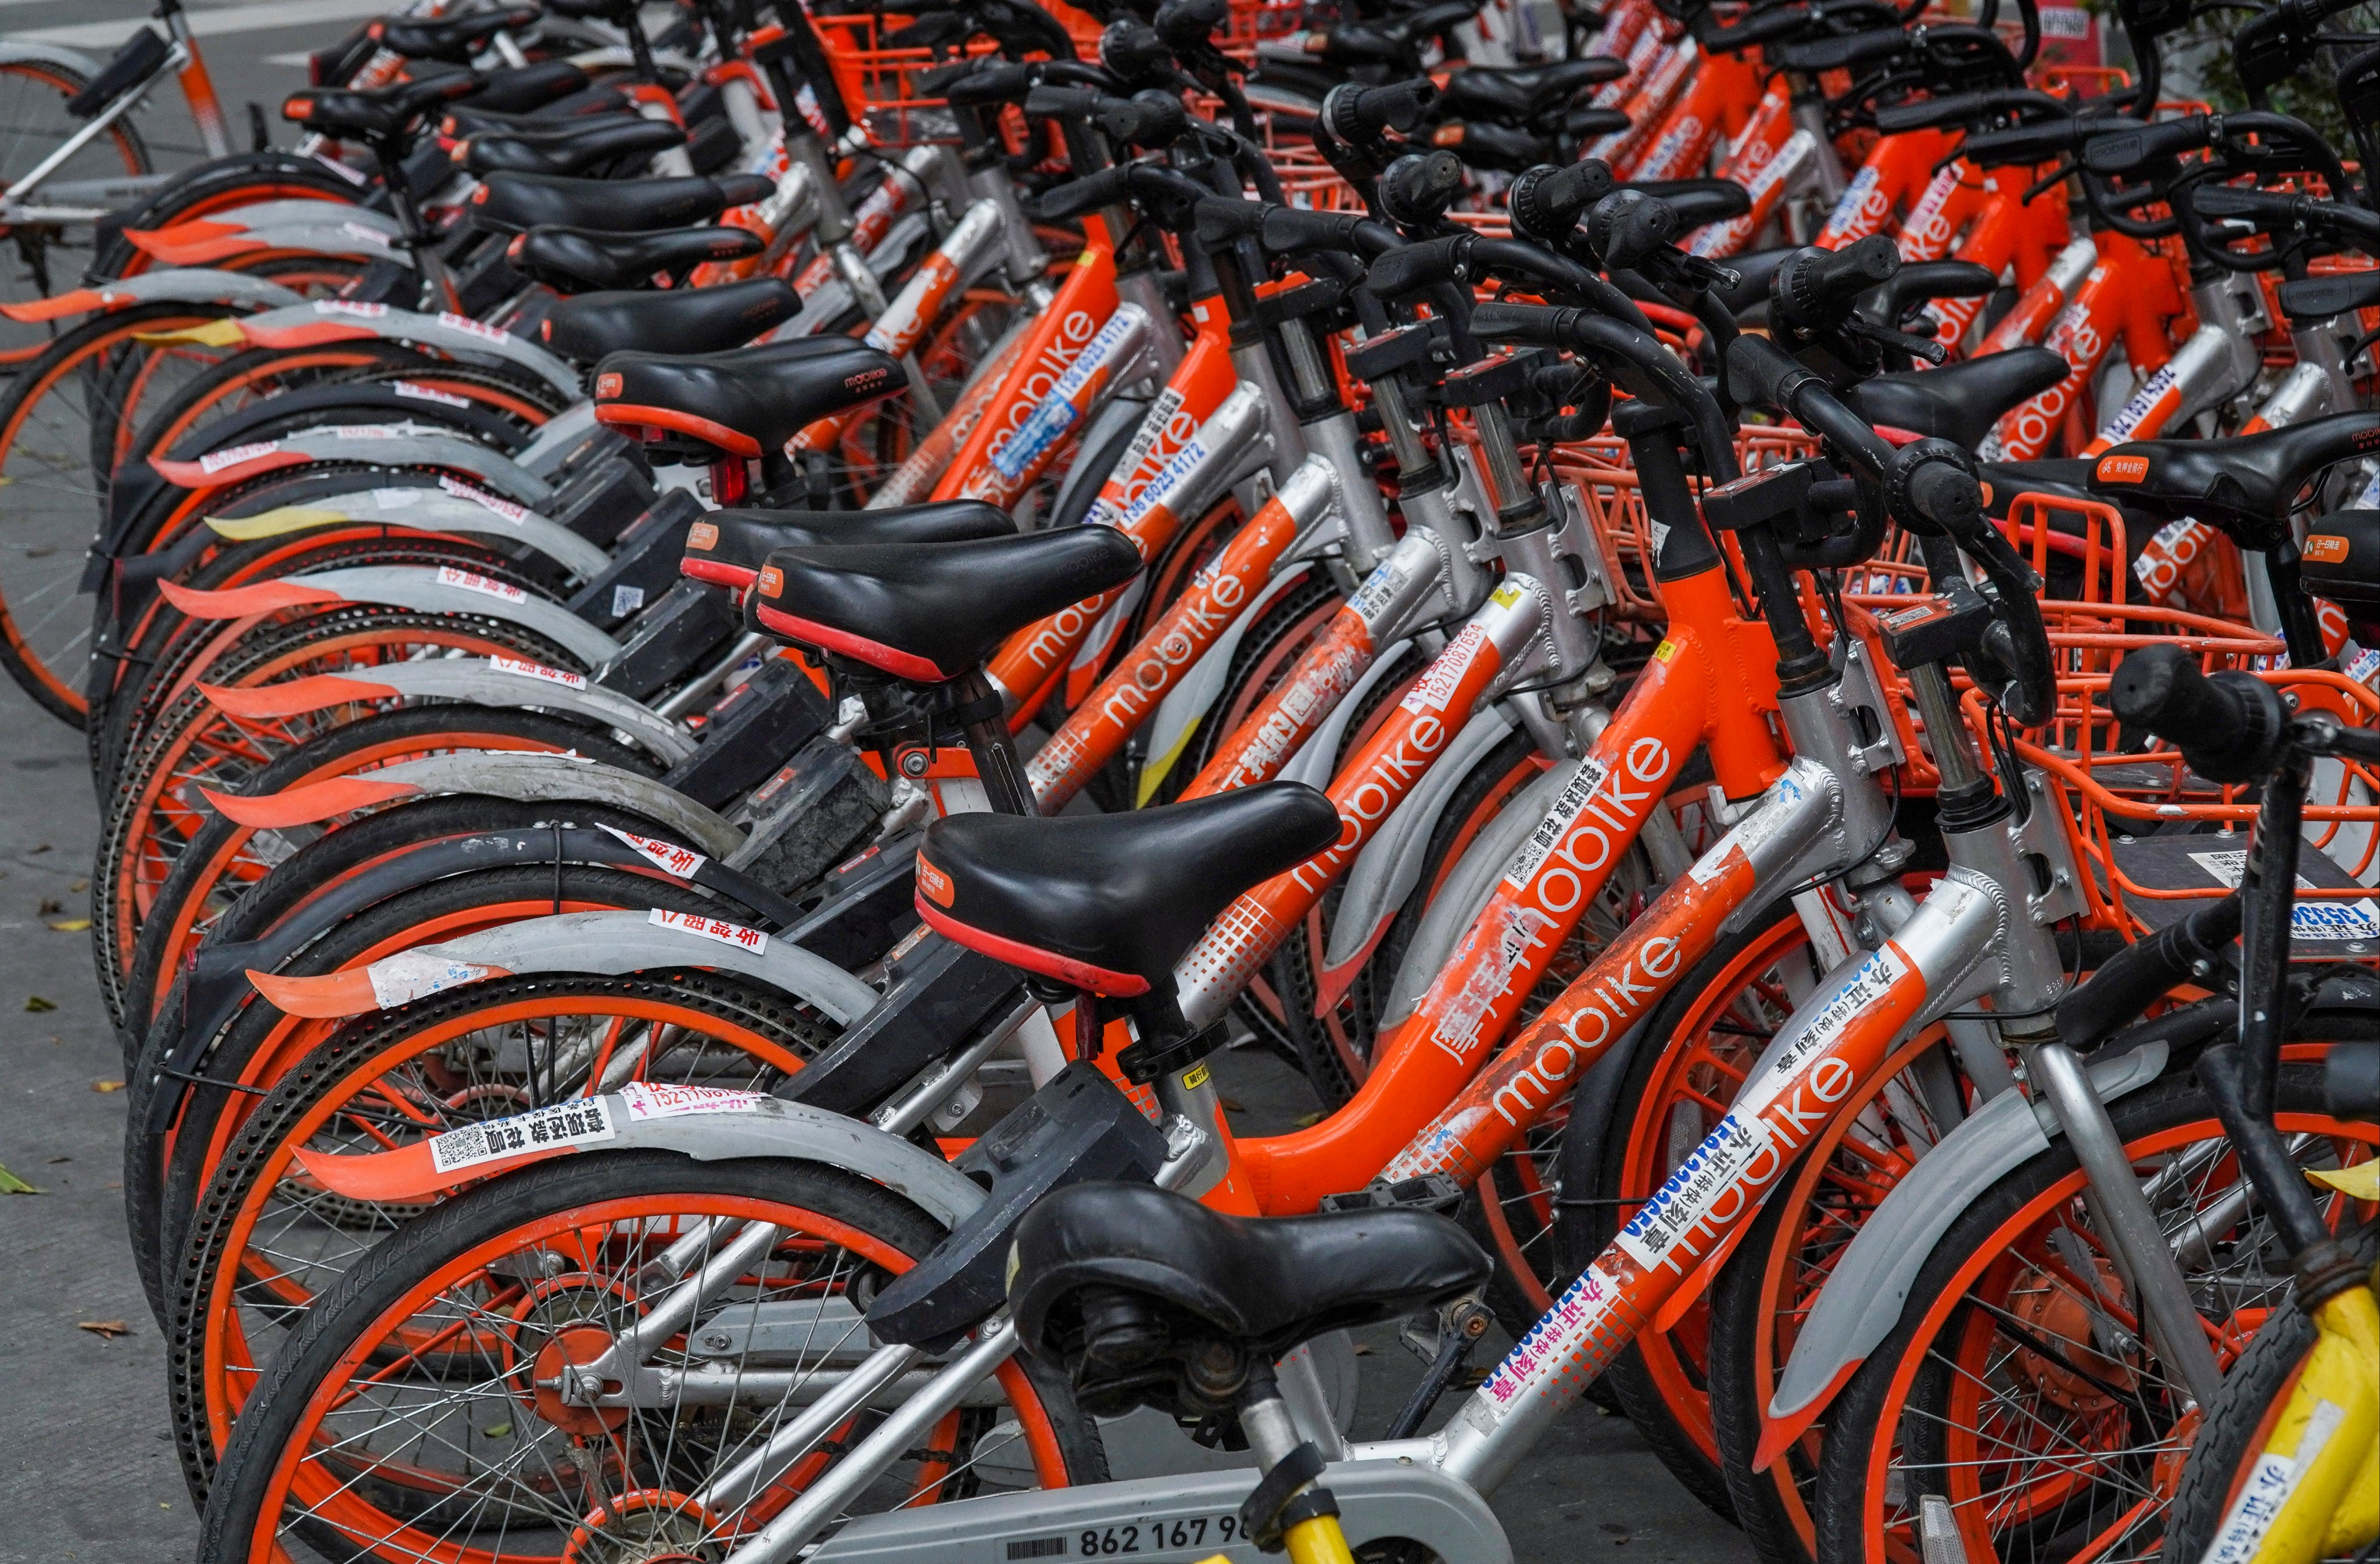 Bike-sharing bicycles are parked on the street in the Futian district of Shenzhen in this photo dated March 19, 2019. Photo:  SCMP / Roy Issa